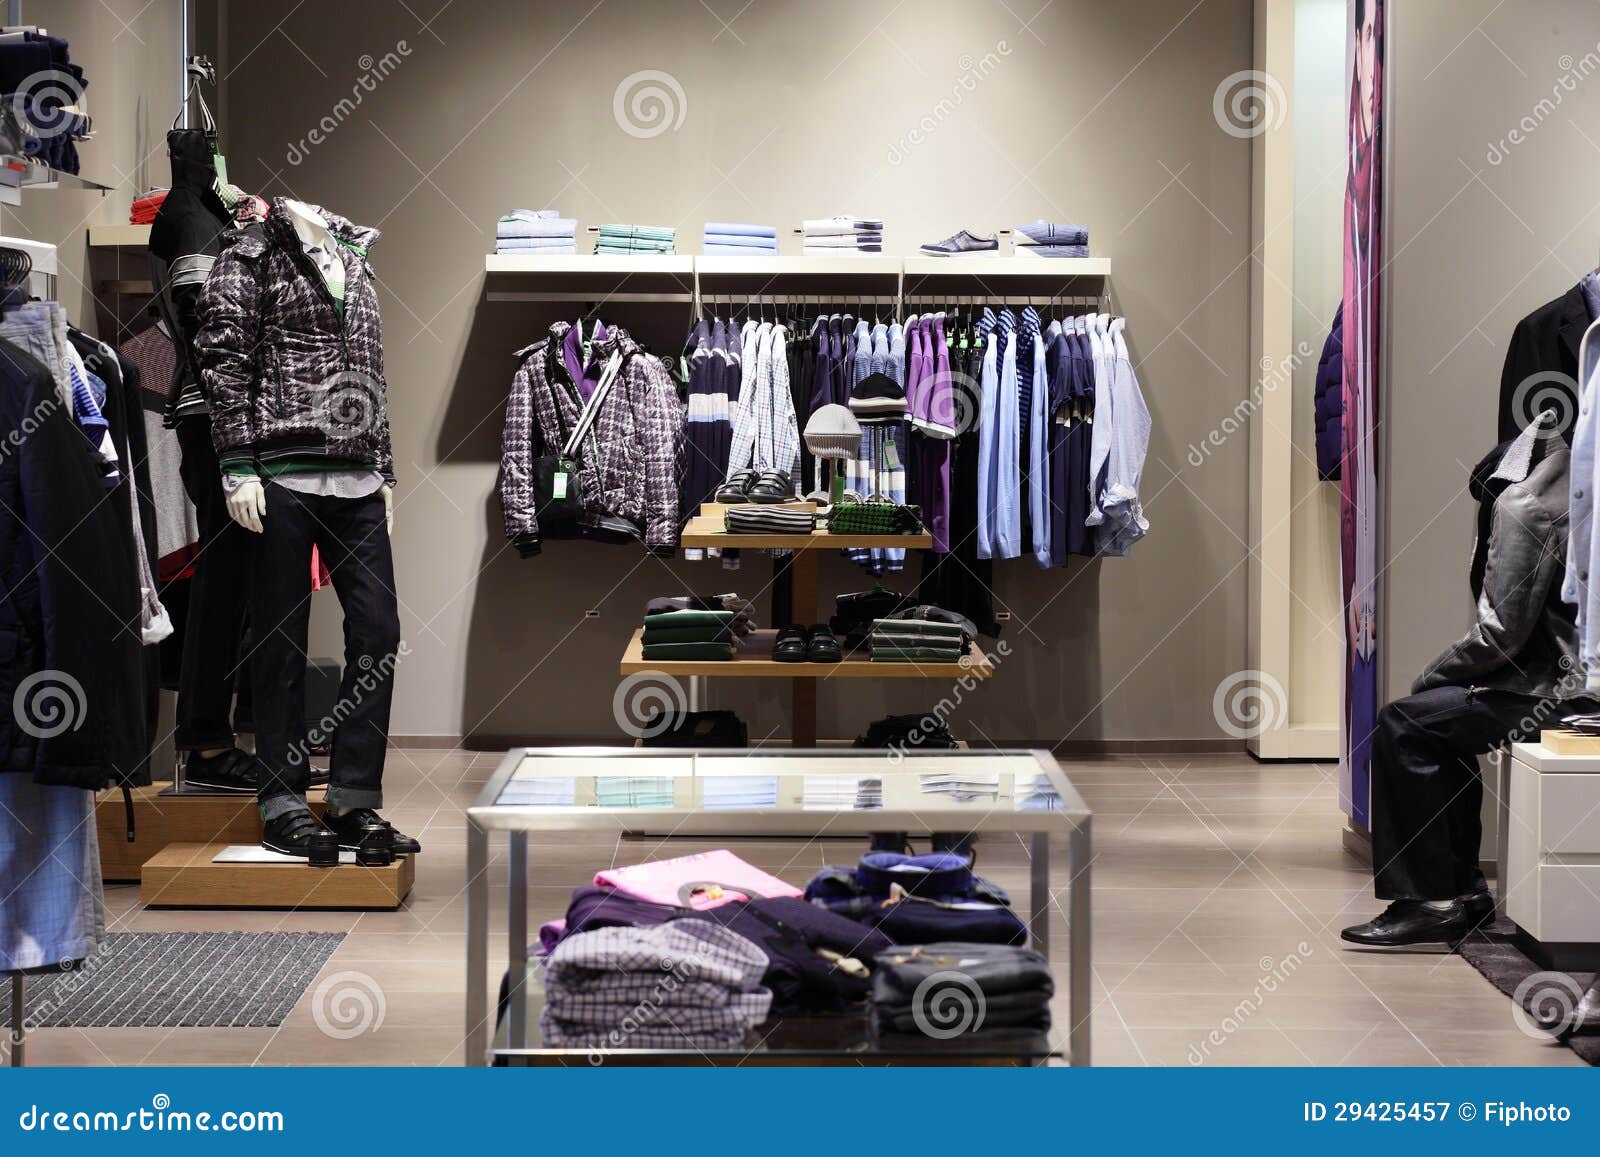 Modern and Fashion Clothes Store Stock Image - Image of light, glass ...